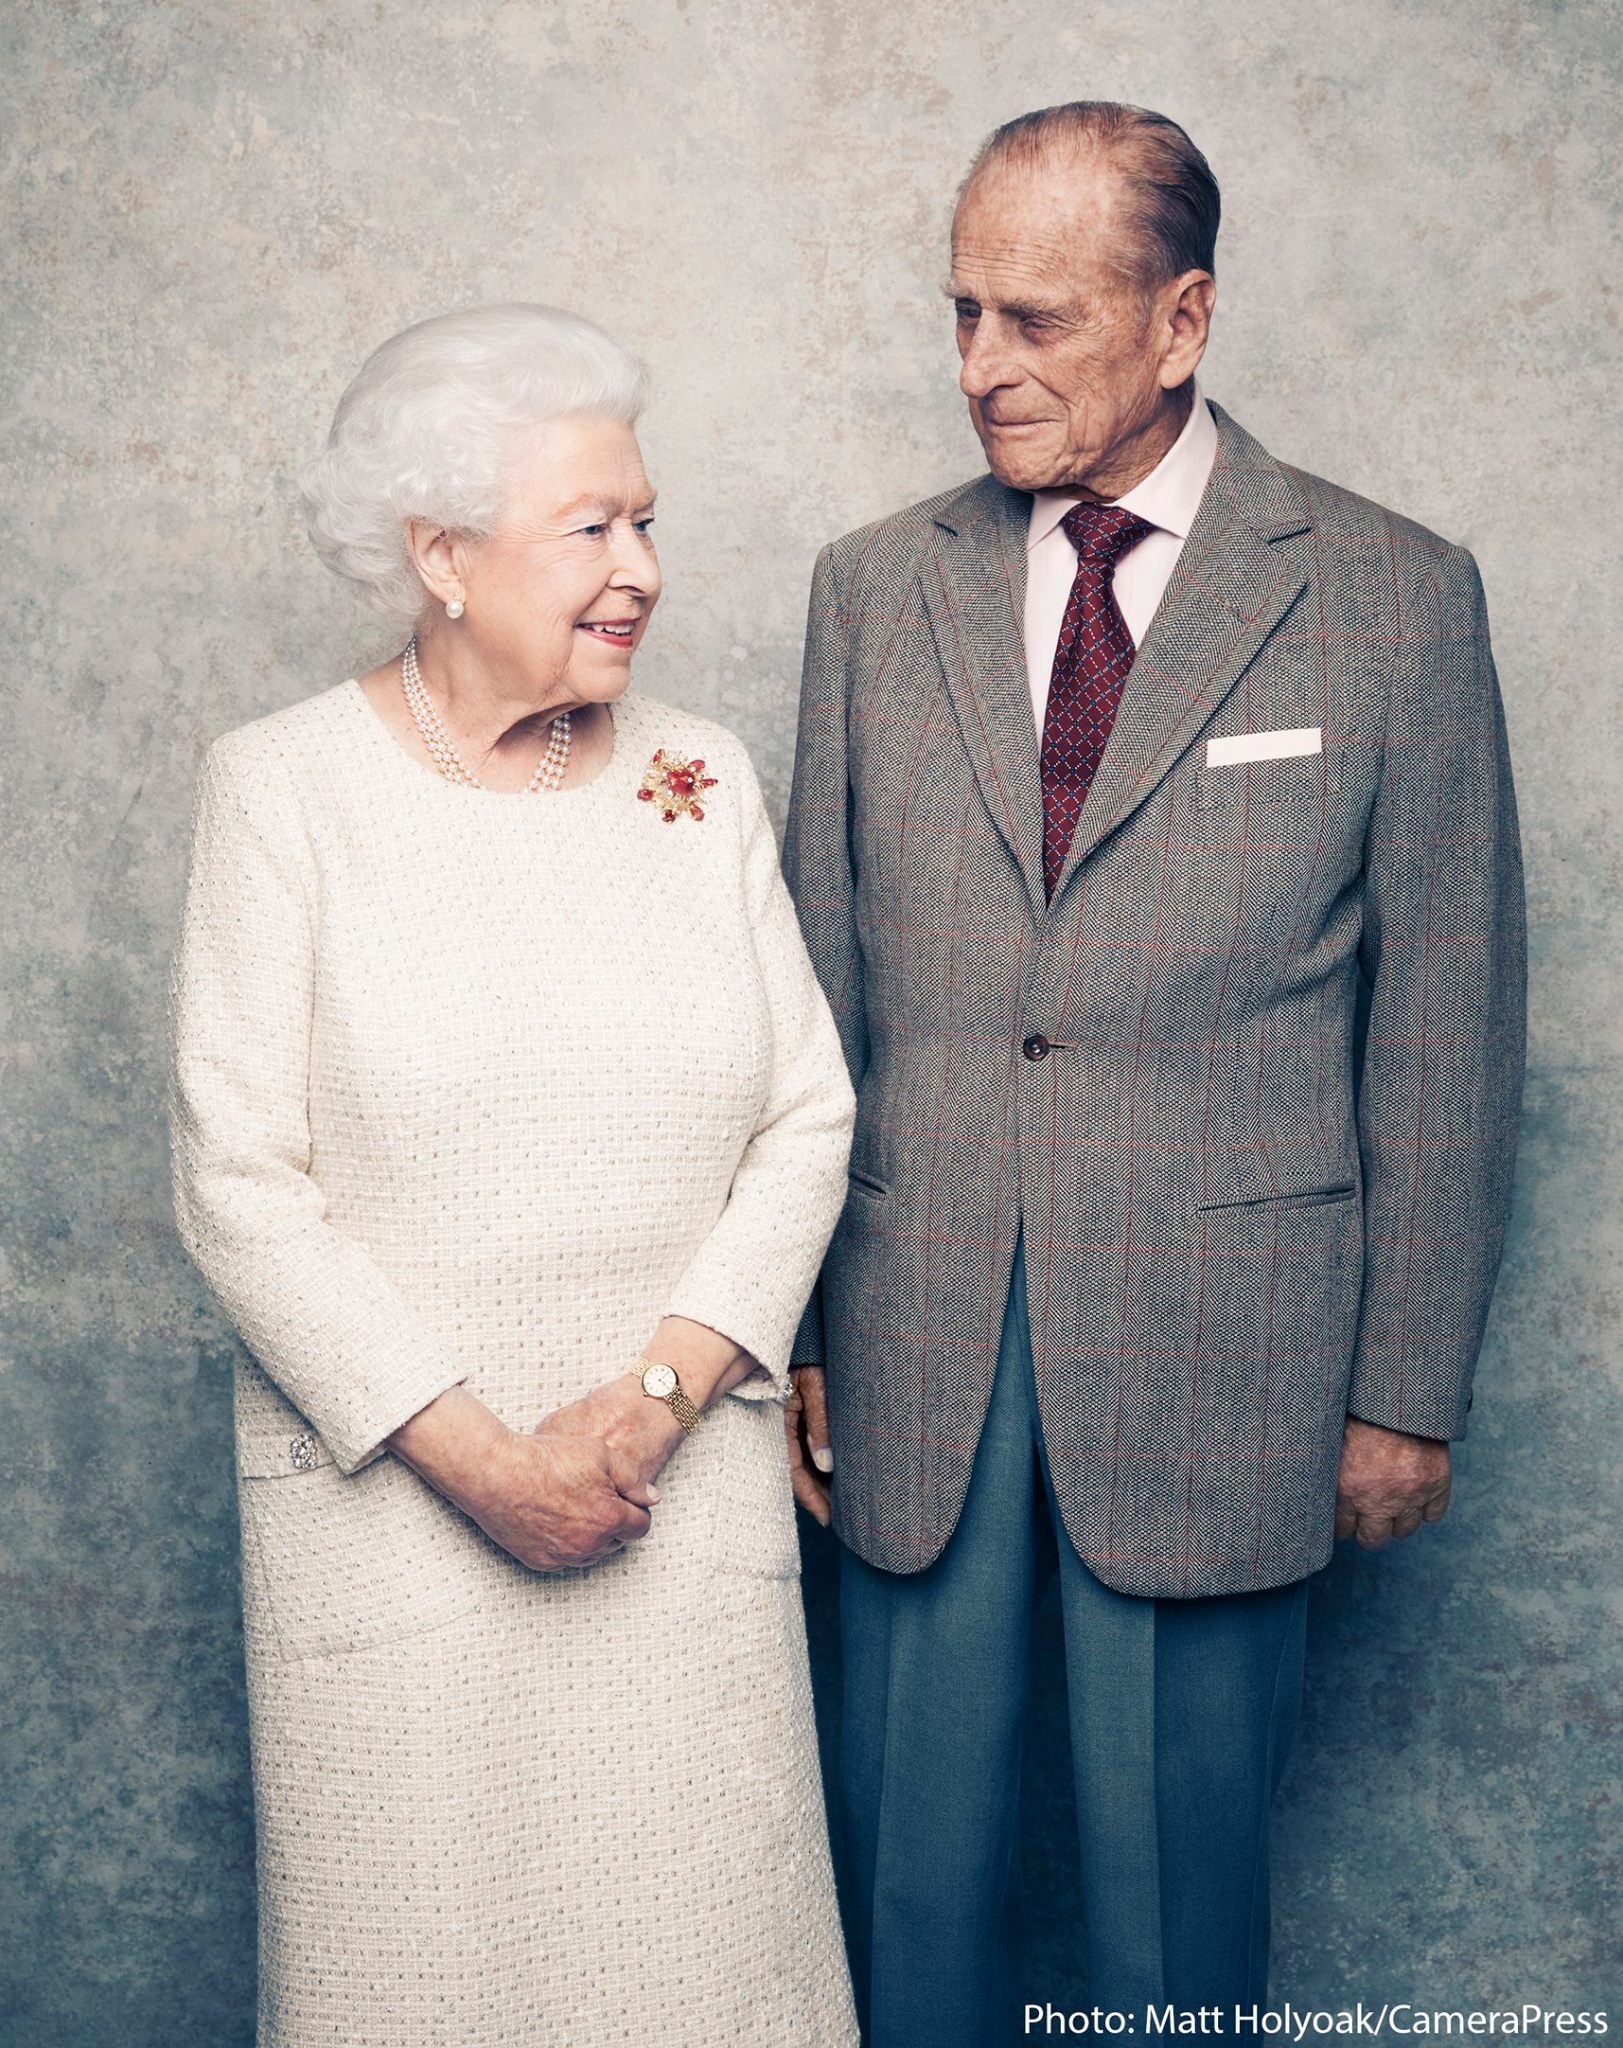 SEVENTY YEARS. In this photograph released by Buckingham Palace on November 19, 2017 and taken by Camera Press photographer Matt Holyoak in November 2017, Britain's Queen Elizabeth II and her husband, Britain's Prince Philip, Duke of Edinburgh are pictured in the White Drawing Room at Windsor Castle, to mark their Platinum Wedding Anniversary (70 years). Matt Holyoak / CameraPress / Buckingham Palace 